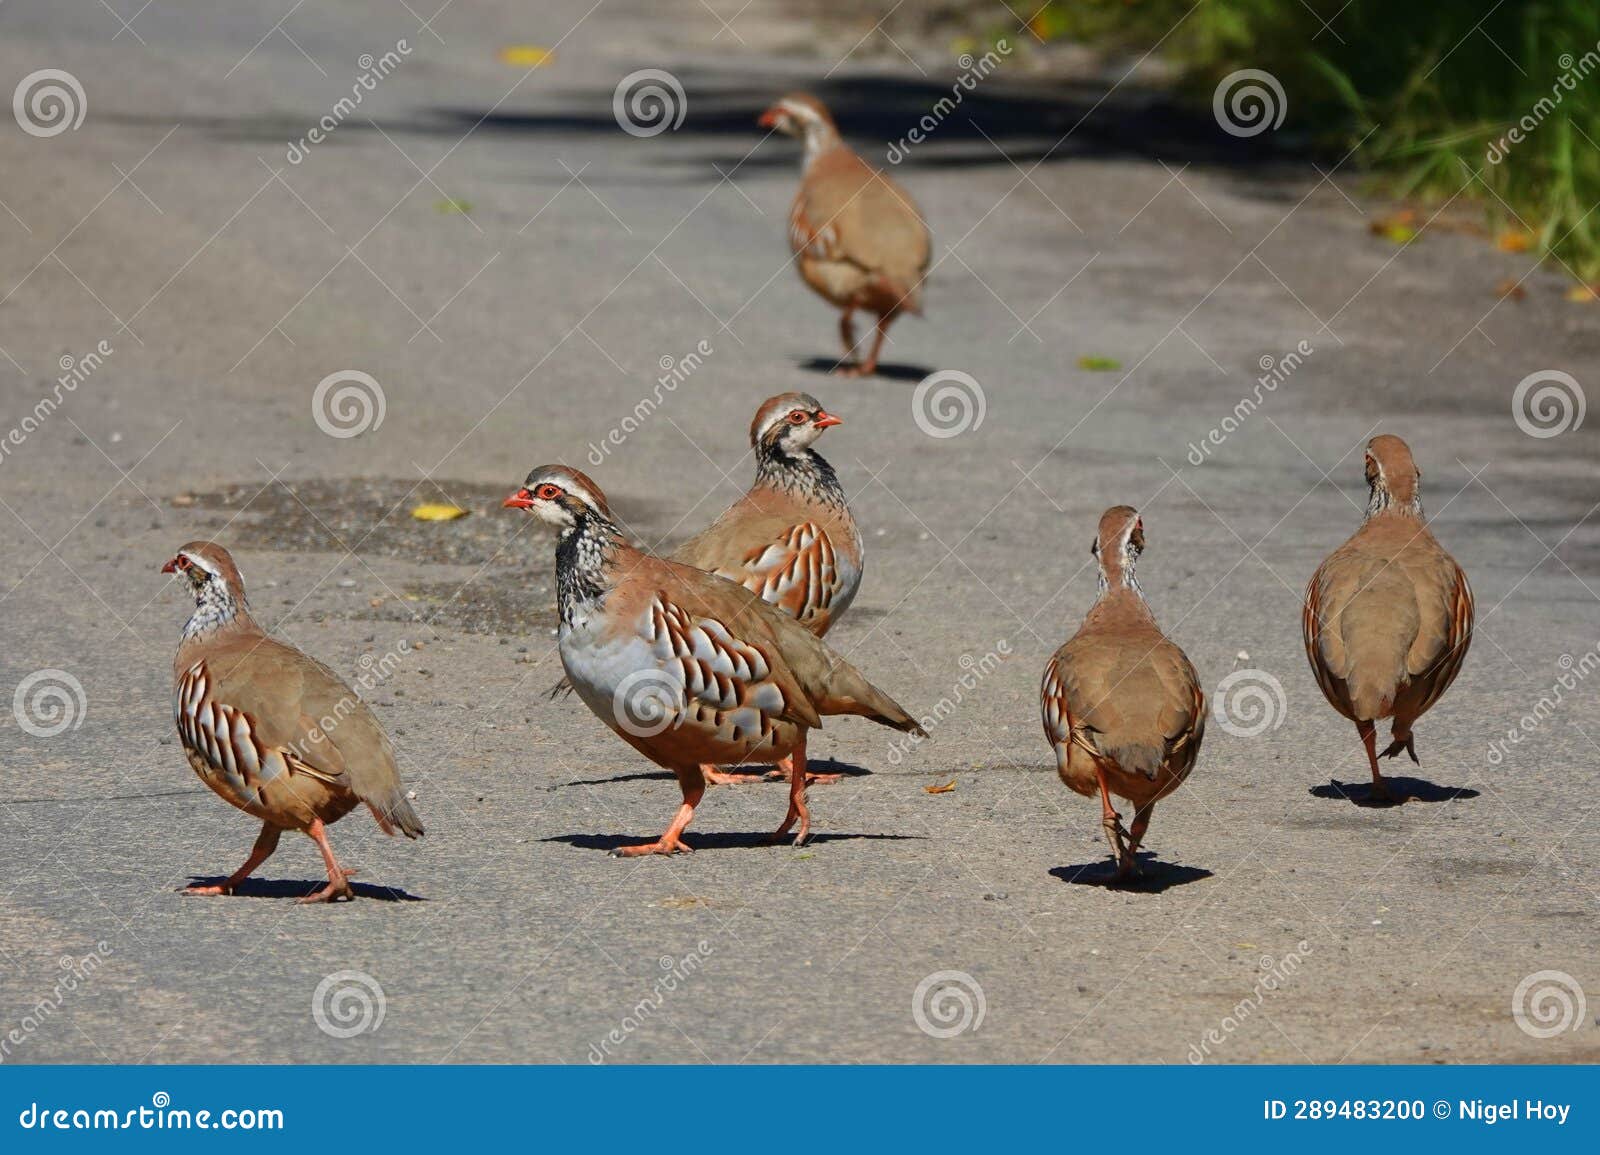 red legged partridges on country road